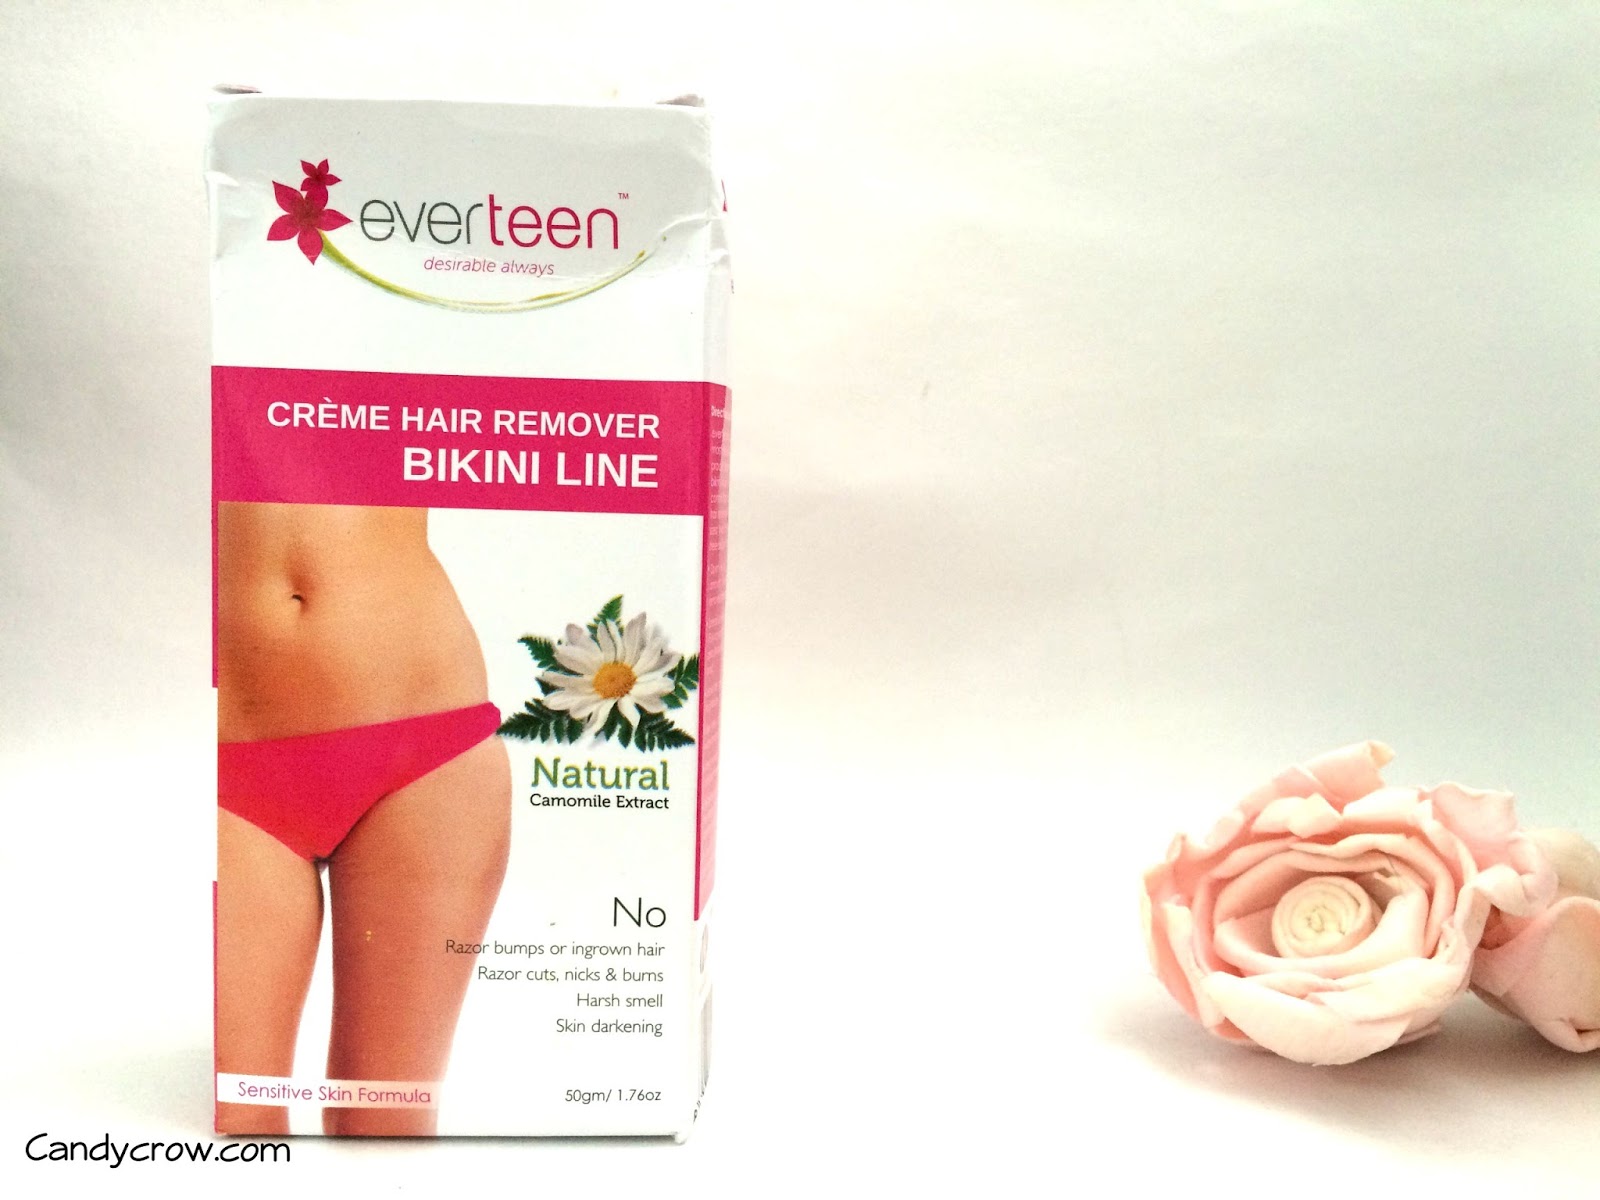 Everteen Bikini Line Hair Remover Crème Review  Beauty and Blush